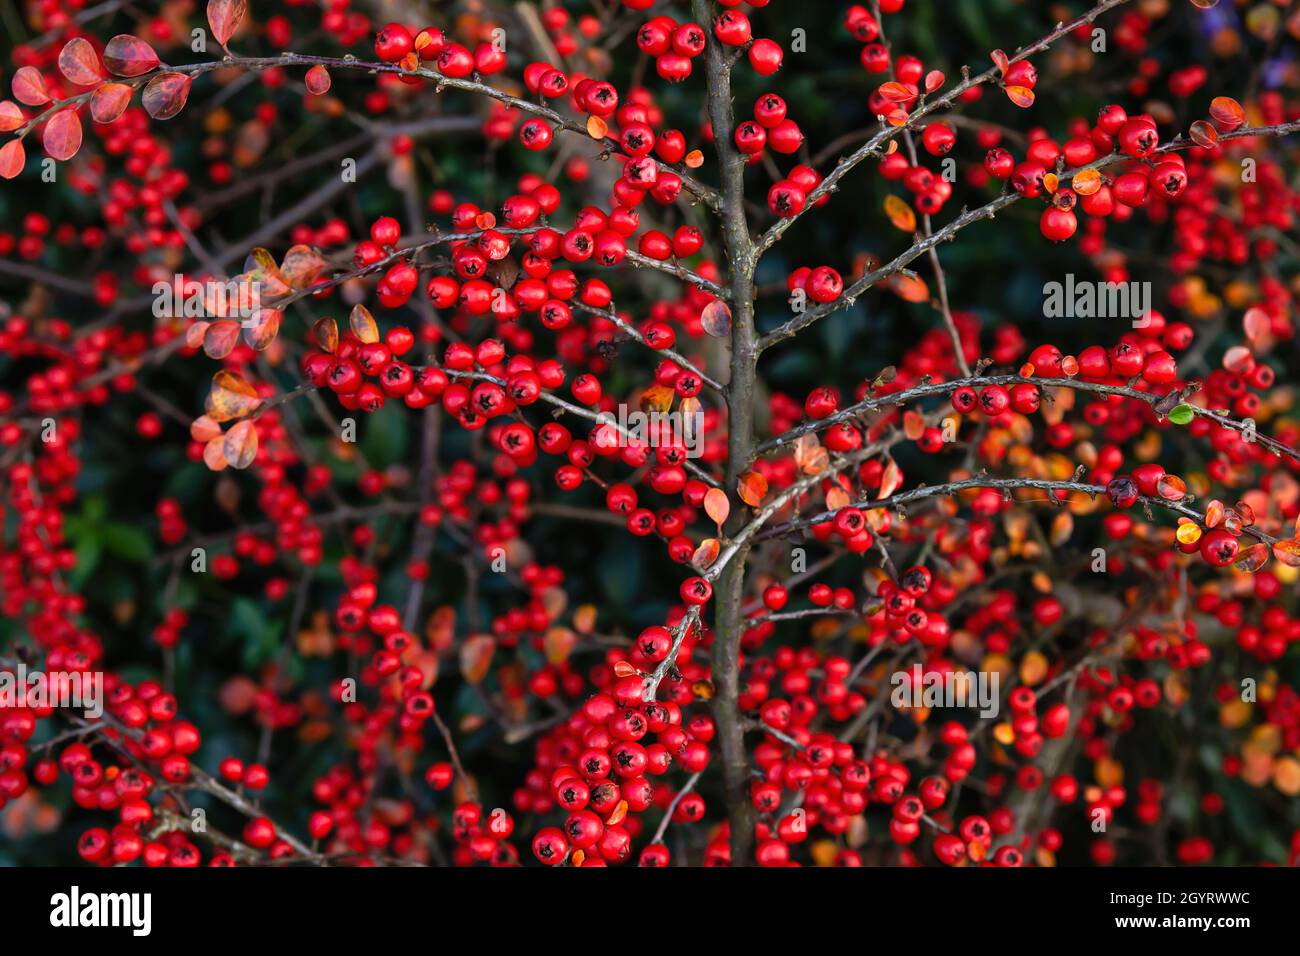 Cotoneaster horizontalis or wall cotoneaster red berries Stock Photo